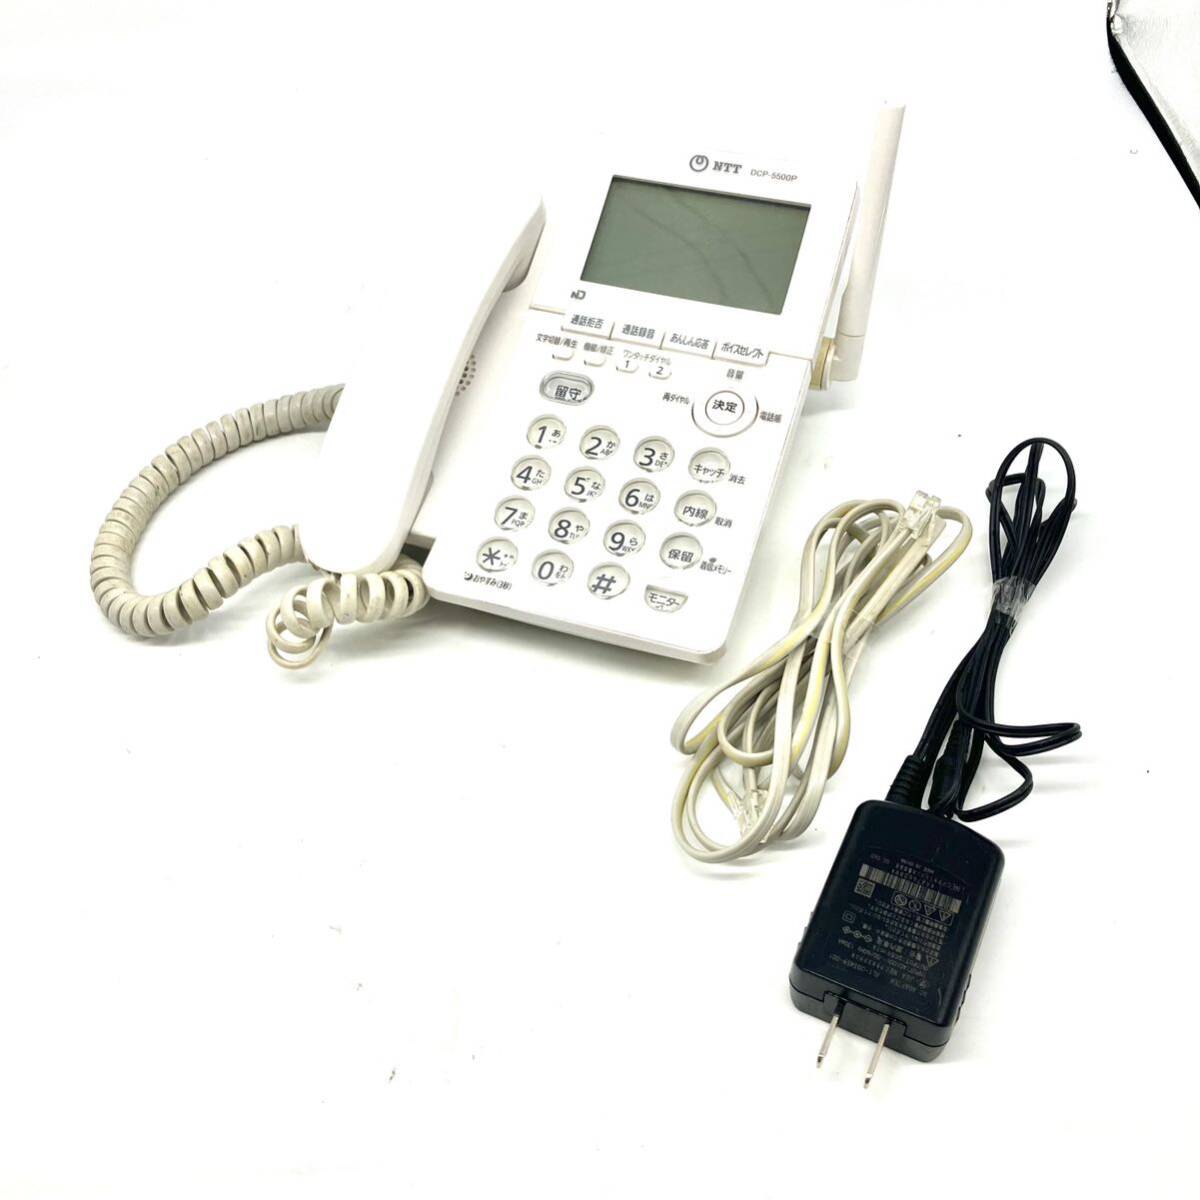 1 jpy start [ super rare beautiful goods ] electrification has confirmed telephone machine East Japan electro- confidence telephone (NTT East Japan ) digital cordless ho nDCP-5500PM business phone 